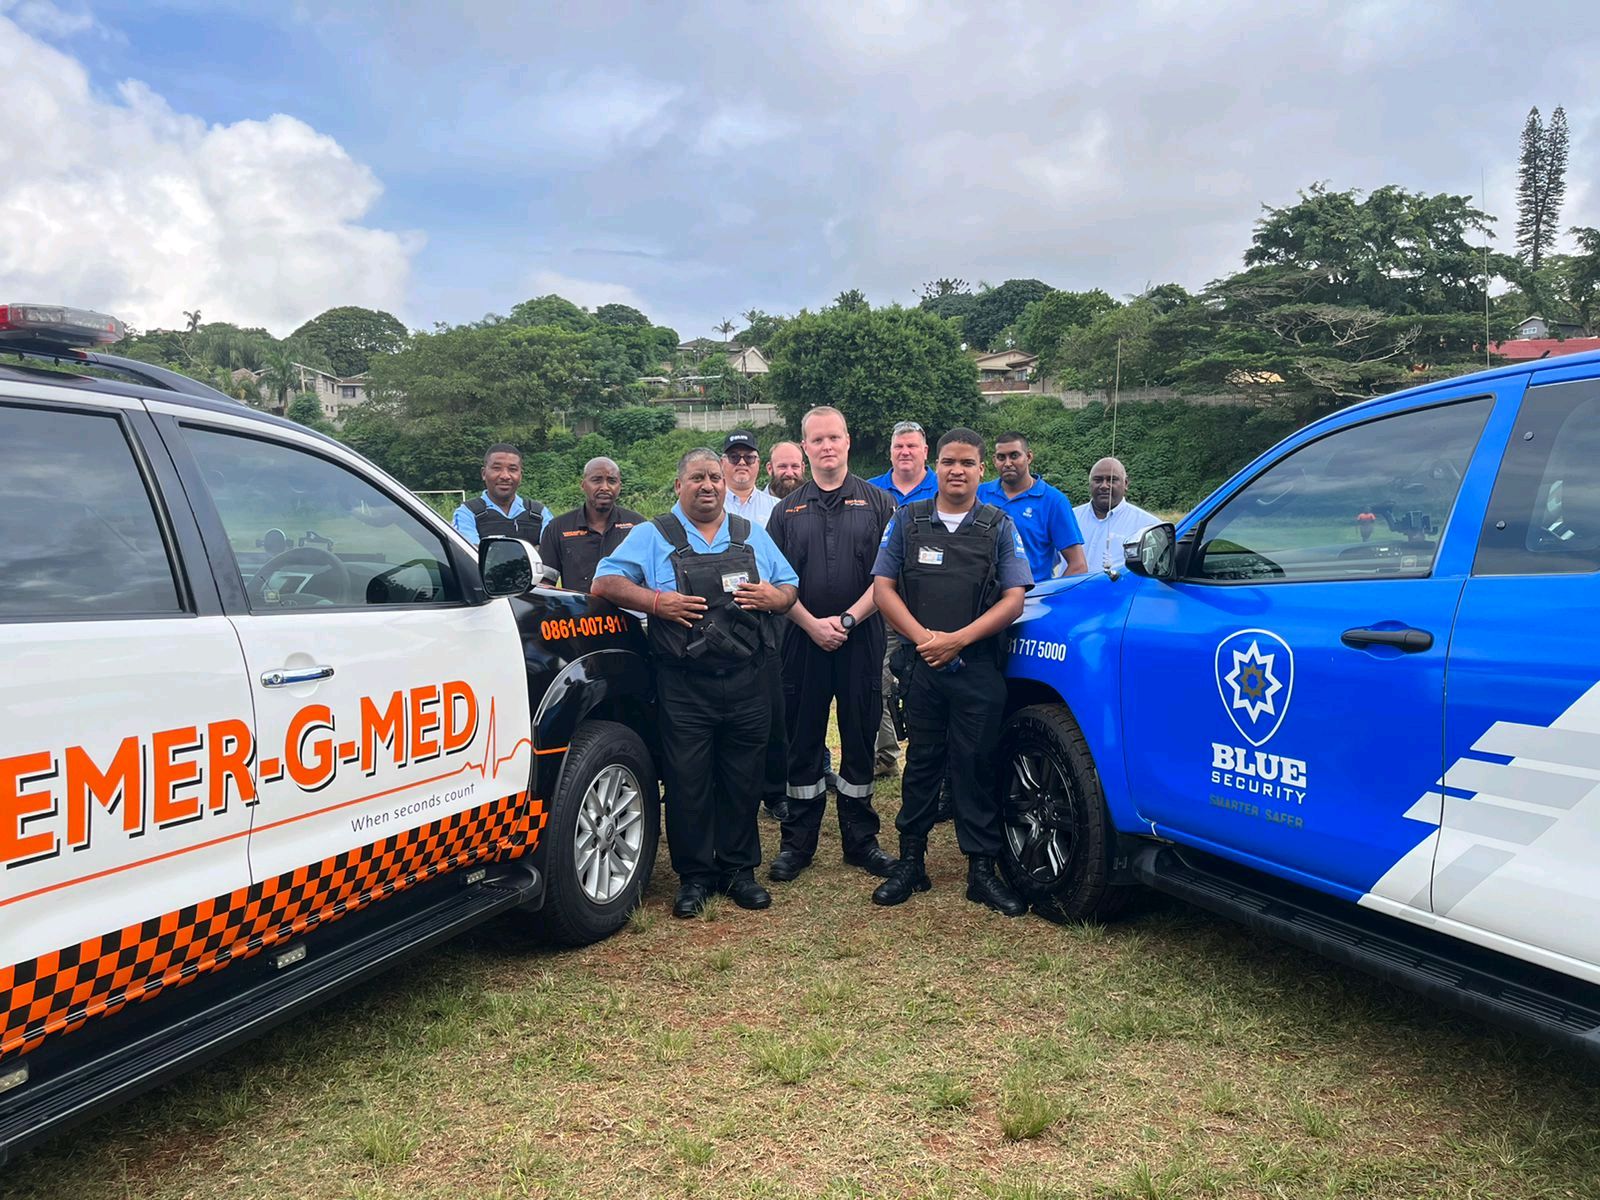 Blue Security and Emer-G-Med are committed to keeping you safe when seconds count